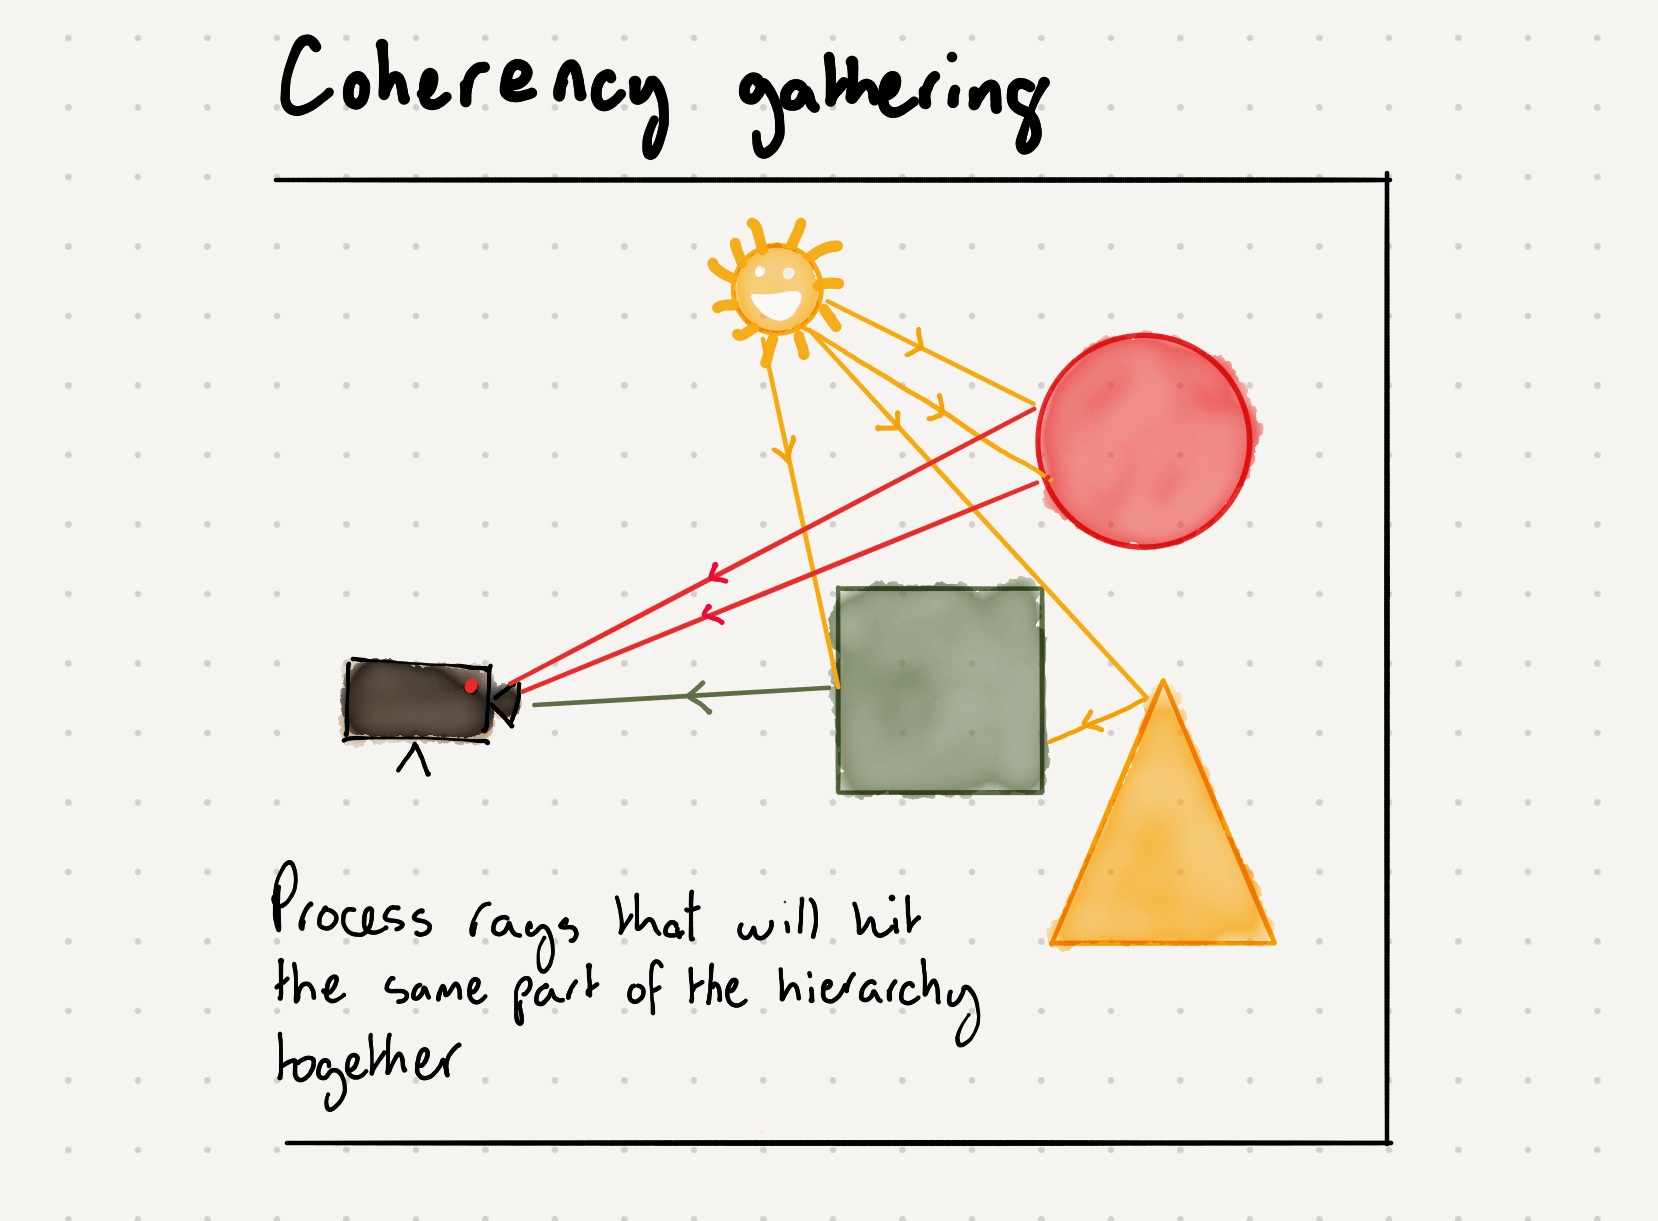 Coherency Gathering